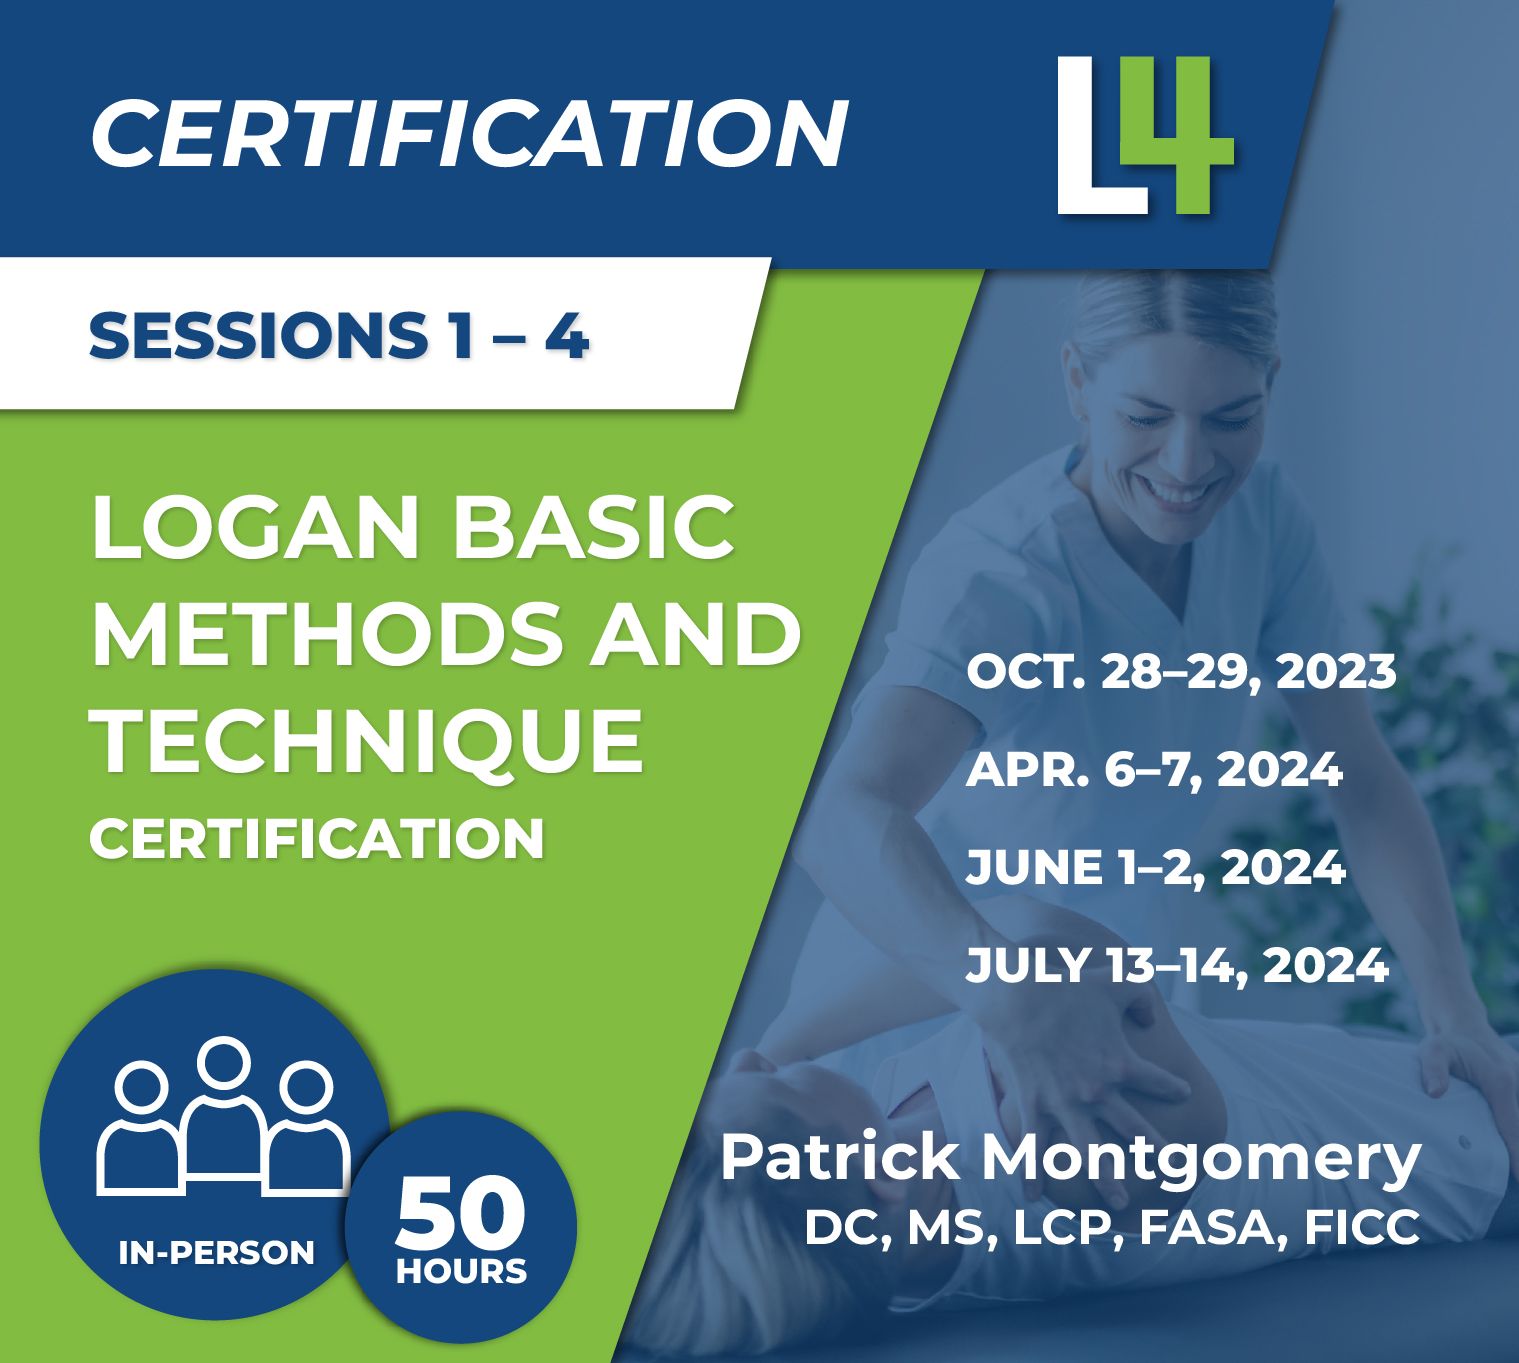 Logan Basic Methods and Technique Certification (50 Hrs)